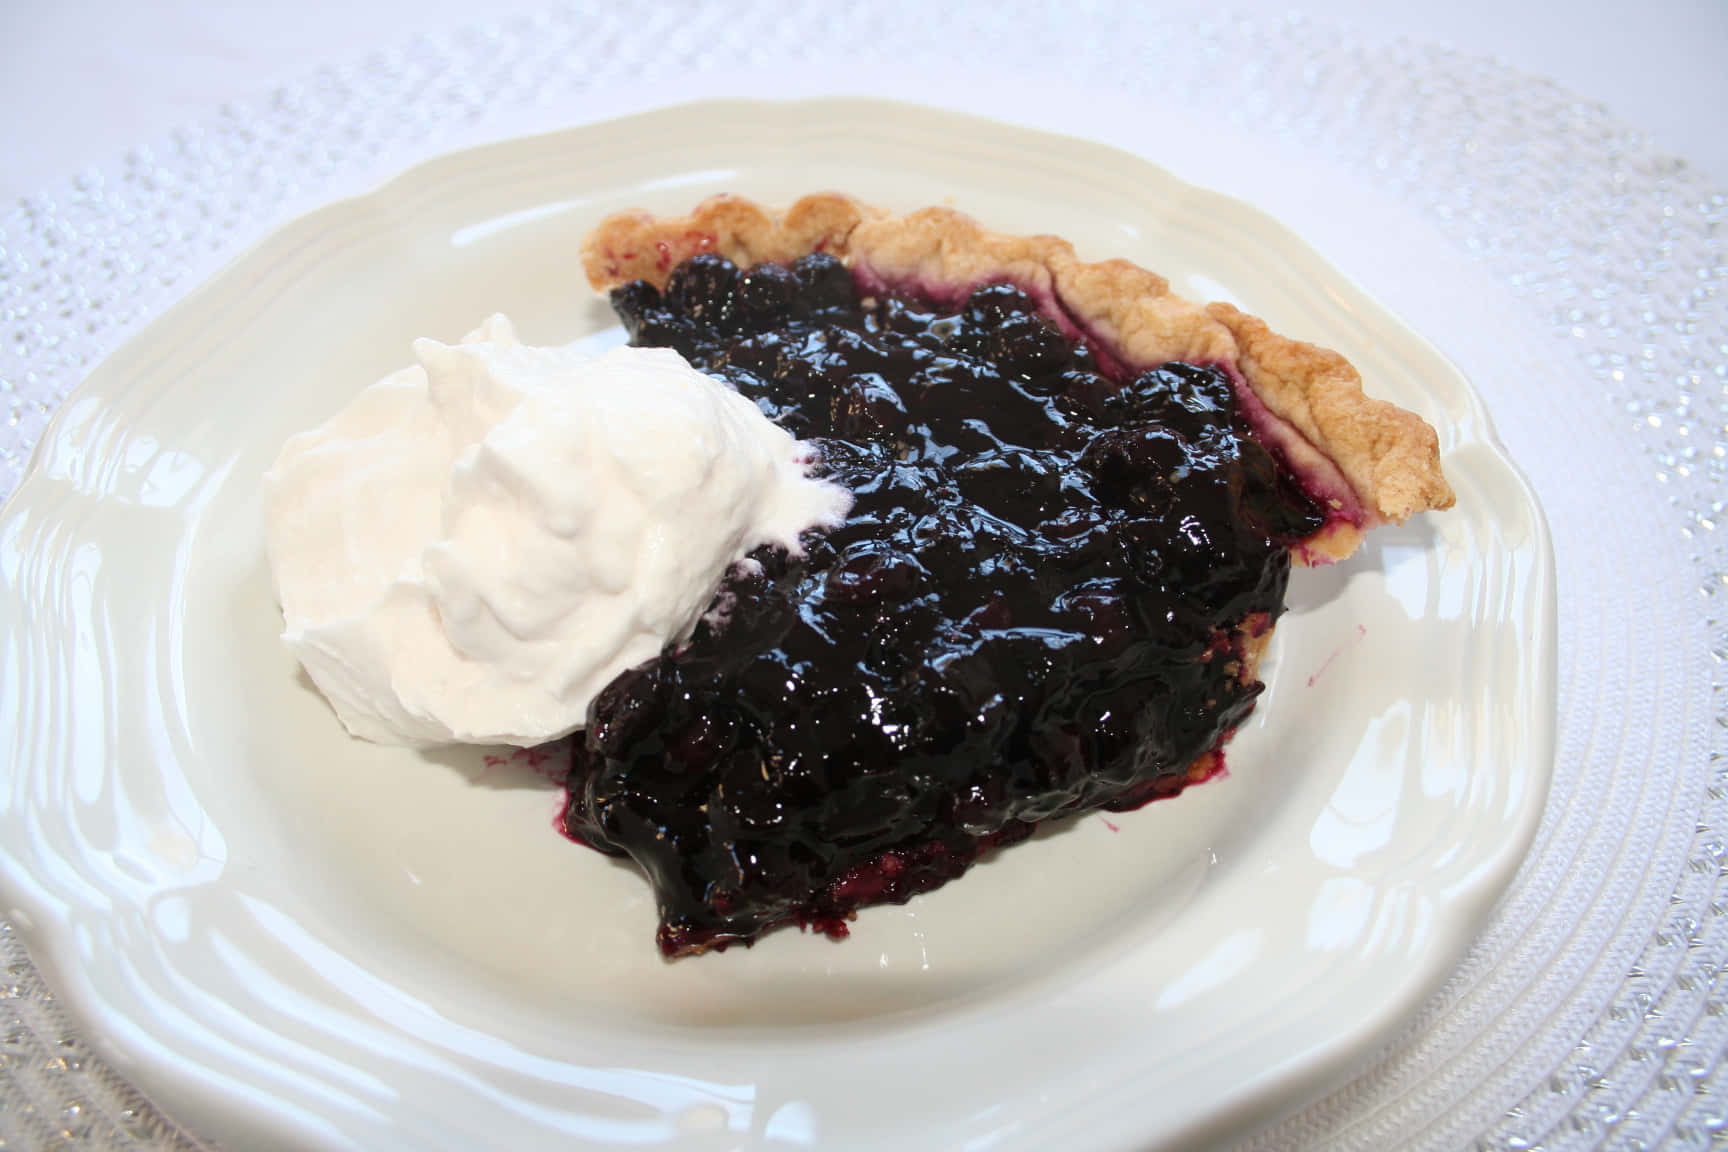 A delicious homemade blueberry pie hot out of the oven. Wallpaper